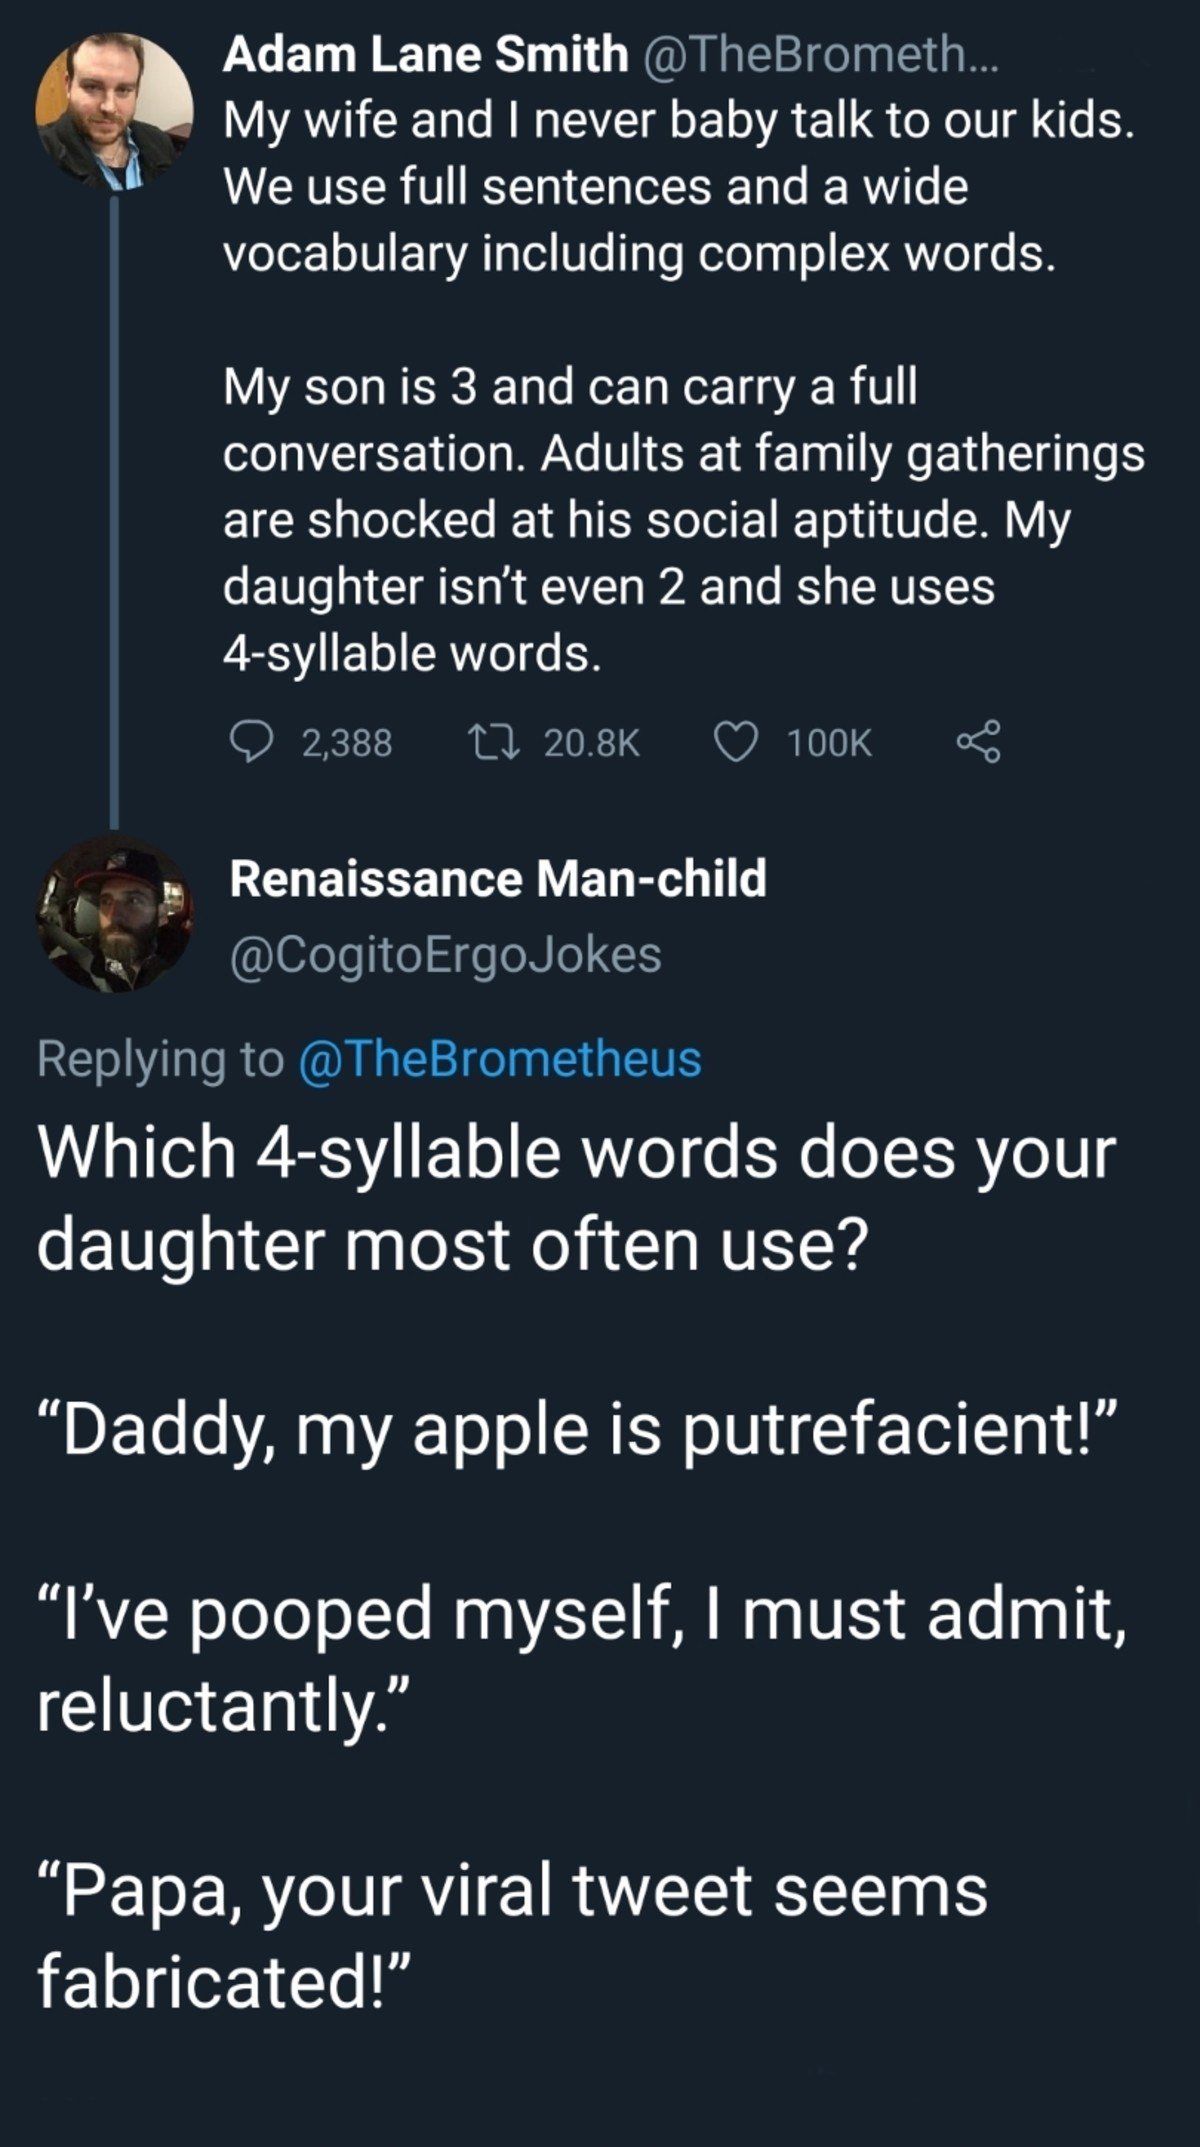 screenshot - Adam Lane Smith .. My wife and I never baby talk to our kids. We use full sentences and a wide vocabulary including complex words. My son is 3 and can carry a full conversation. Adults at family gatherings are shocked at his social aptitude. 